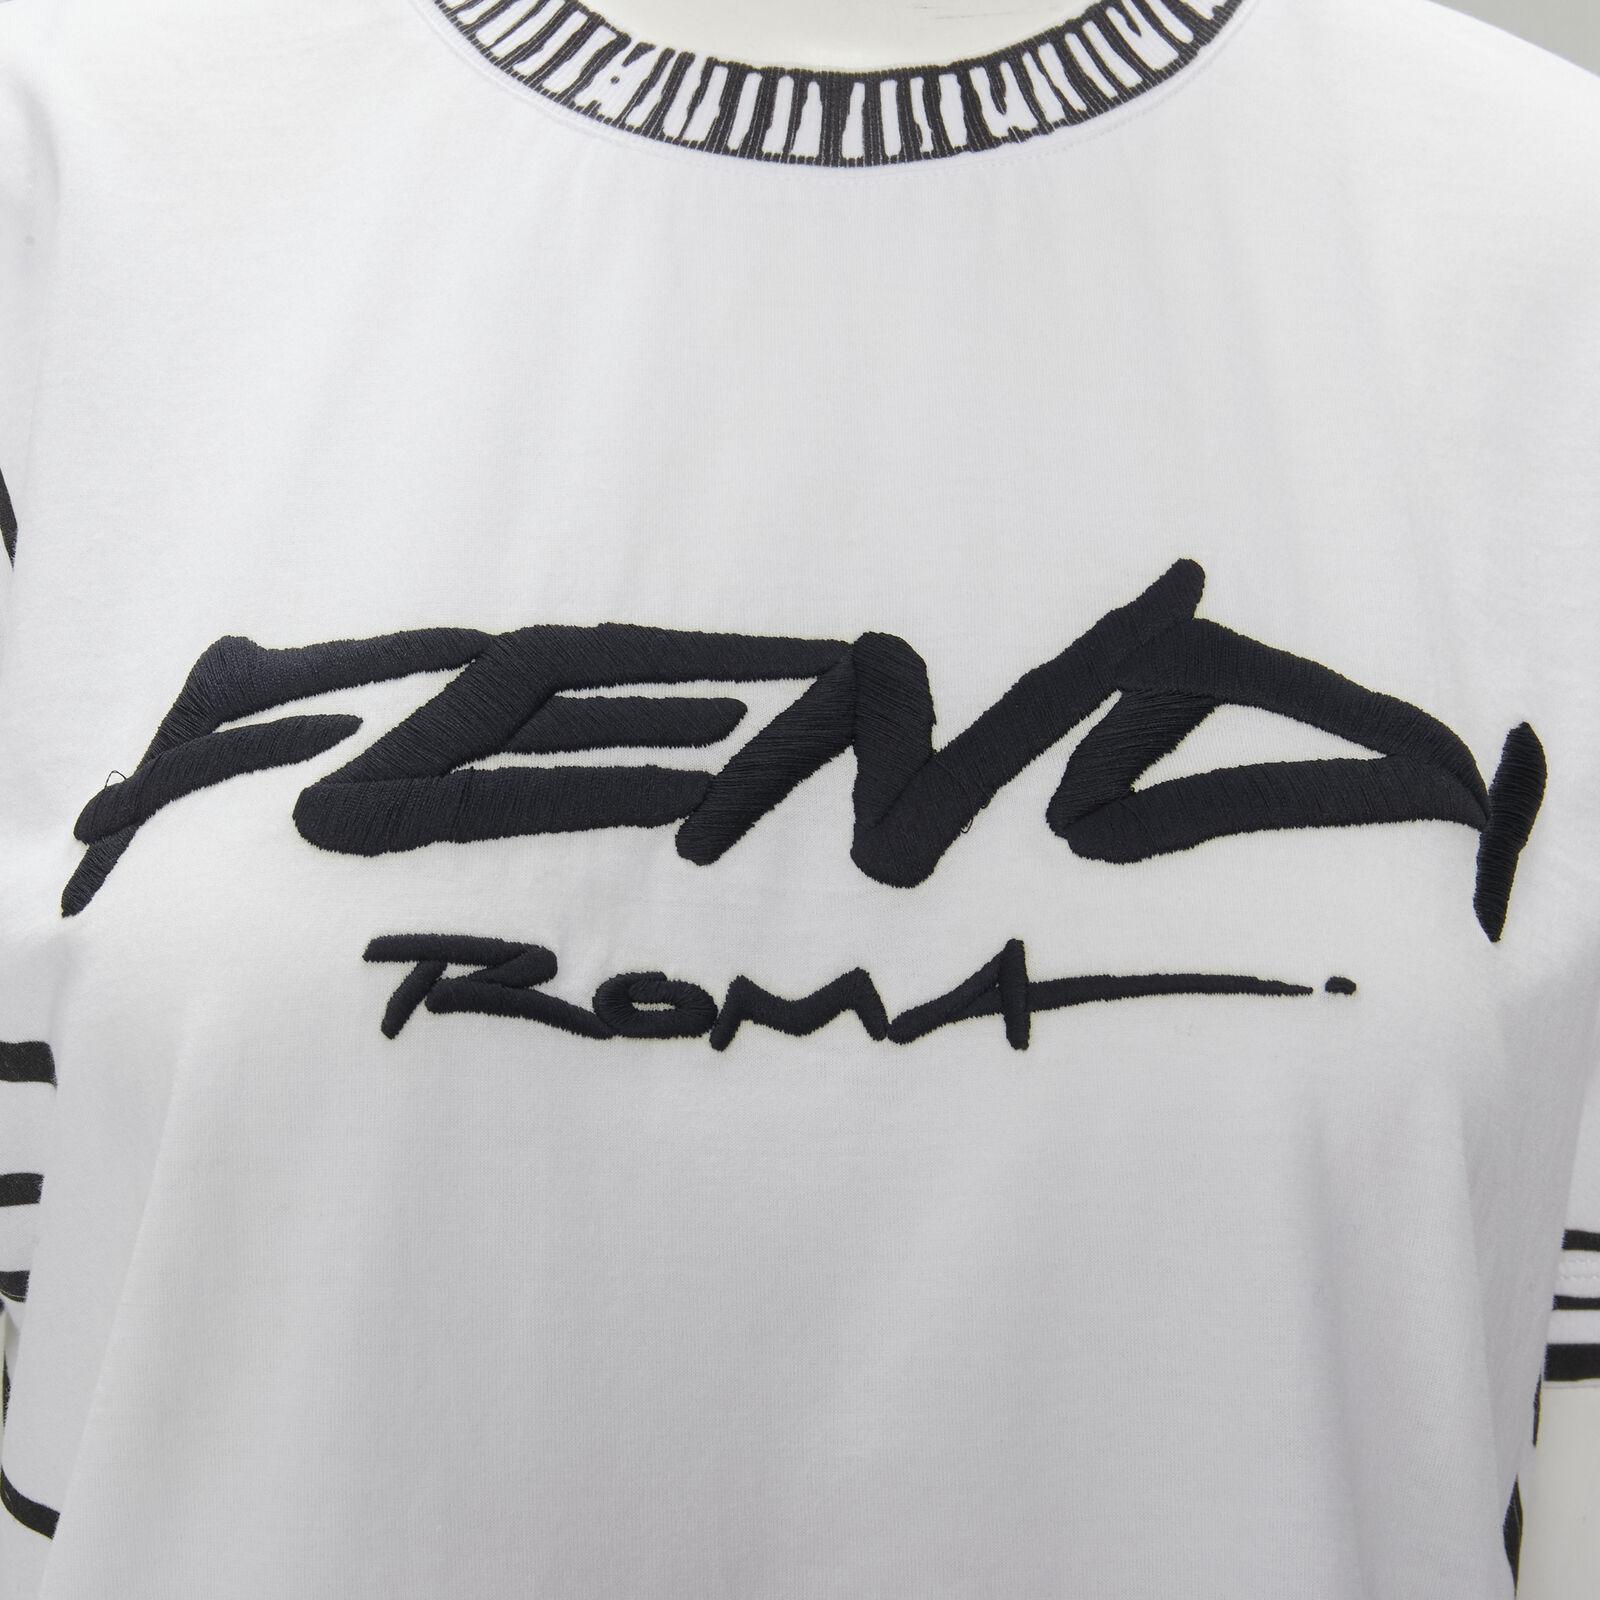 FENDI 2022 Joshua Vides white cotton illustration print logo embroidery tshirt M
Reference: KNLM/A00017
Brand: Fendi
Collection: 2022 Joshua Vide
Material: Cotton
Color: White, Black
Pattern: Solid
Extra Details: Crew neck t-shirt
Made in: